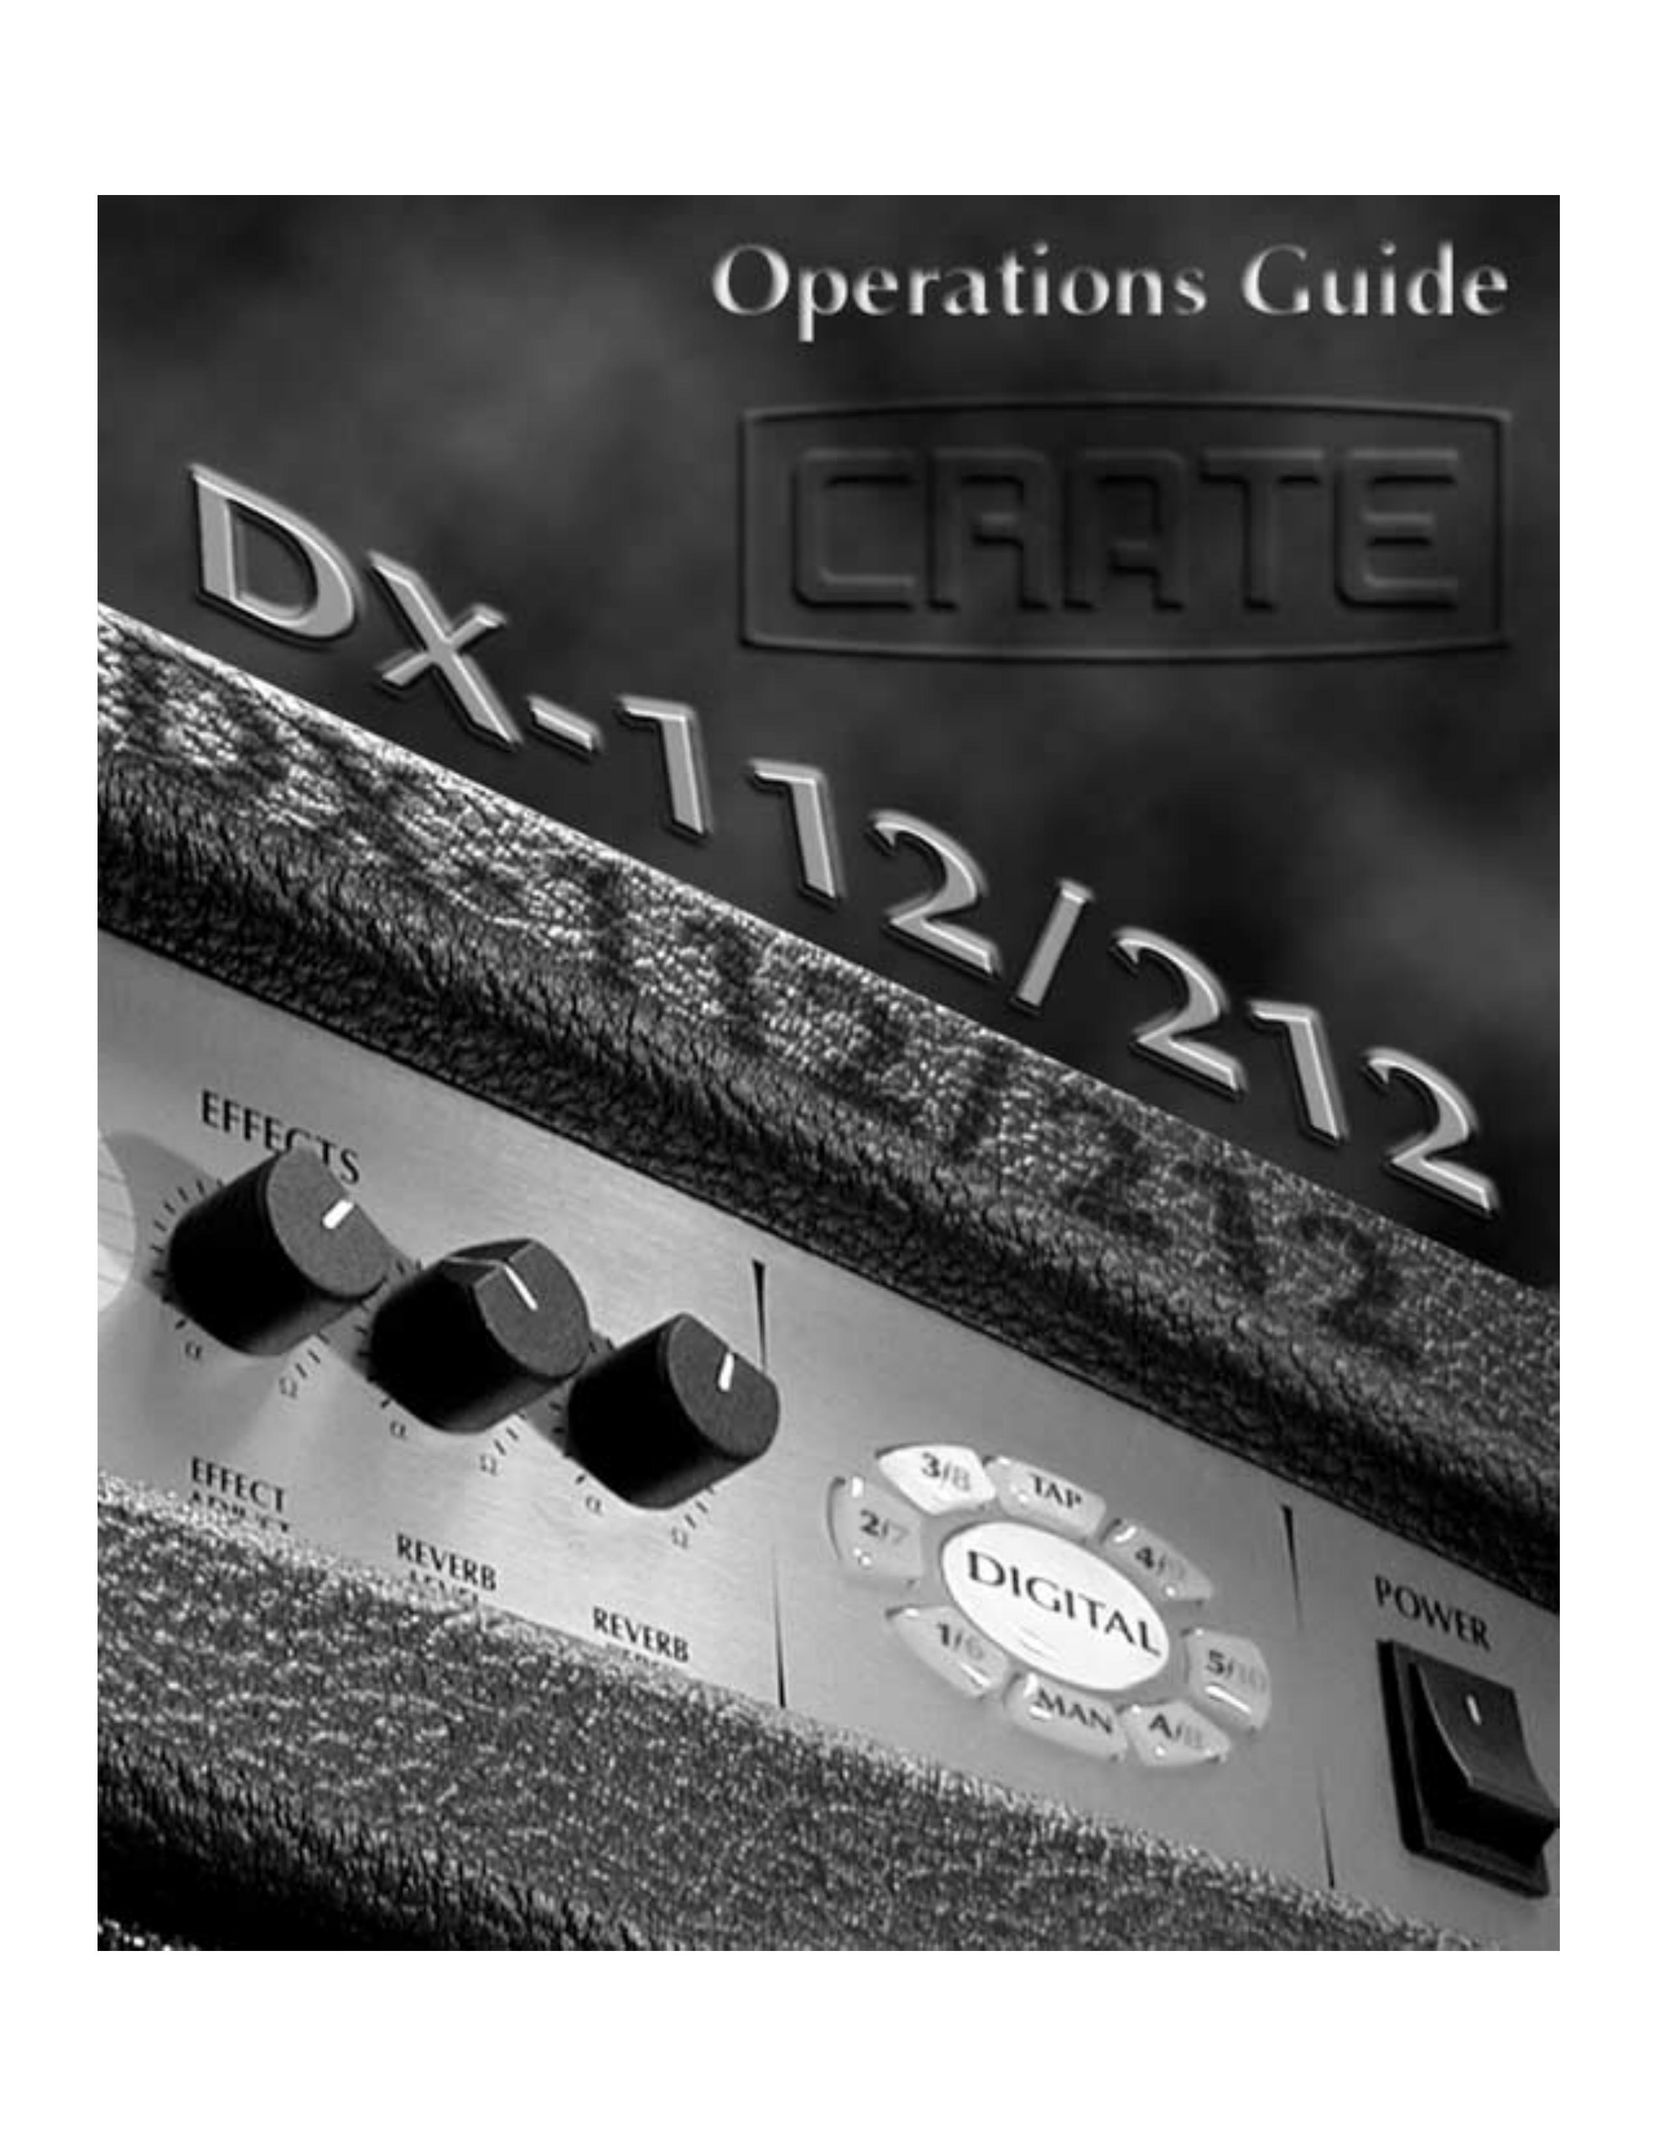 Crate Amplifiers DX-112 Stereo Amplifier User Manual